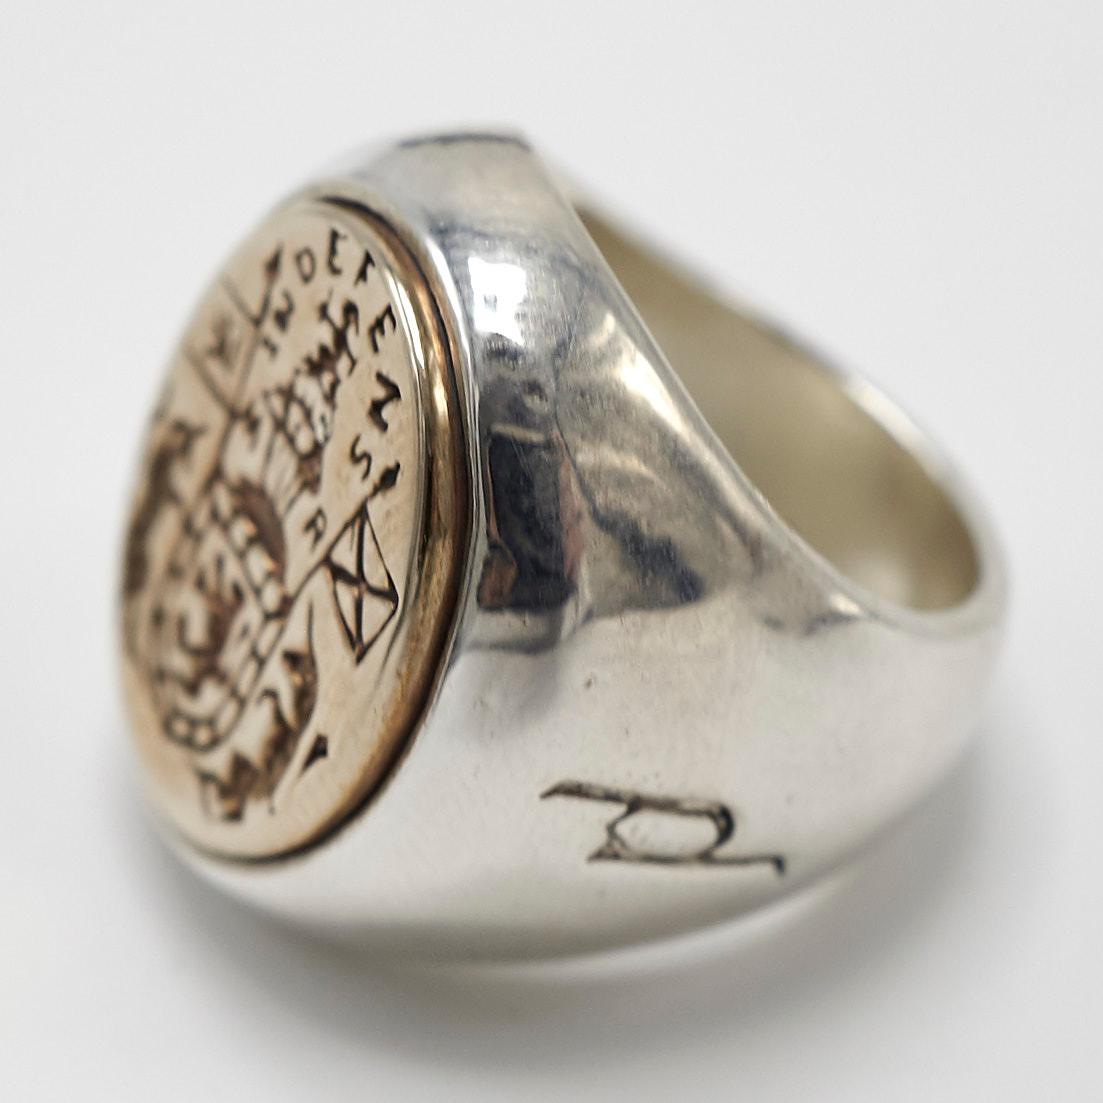 Crest Signet Ring Sterling Silver Bronze Unisex J Dauphin can be worn by women or men.

Inspired by Queen Mary of Scots ring. Gold signet-ring; engraved; shoulders ornamented with flowers and leaves. Oval bezel set with silver intaglio depicting